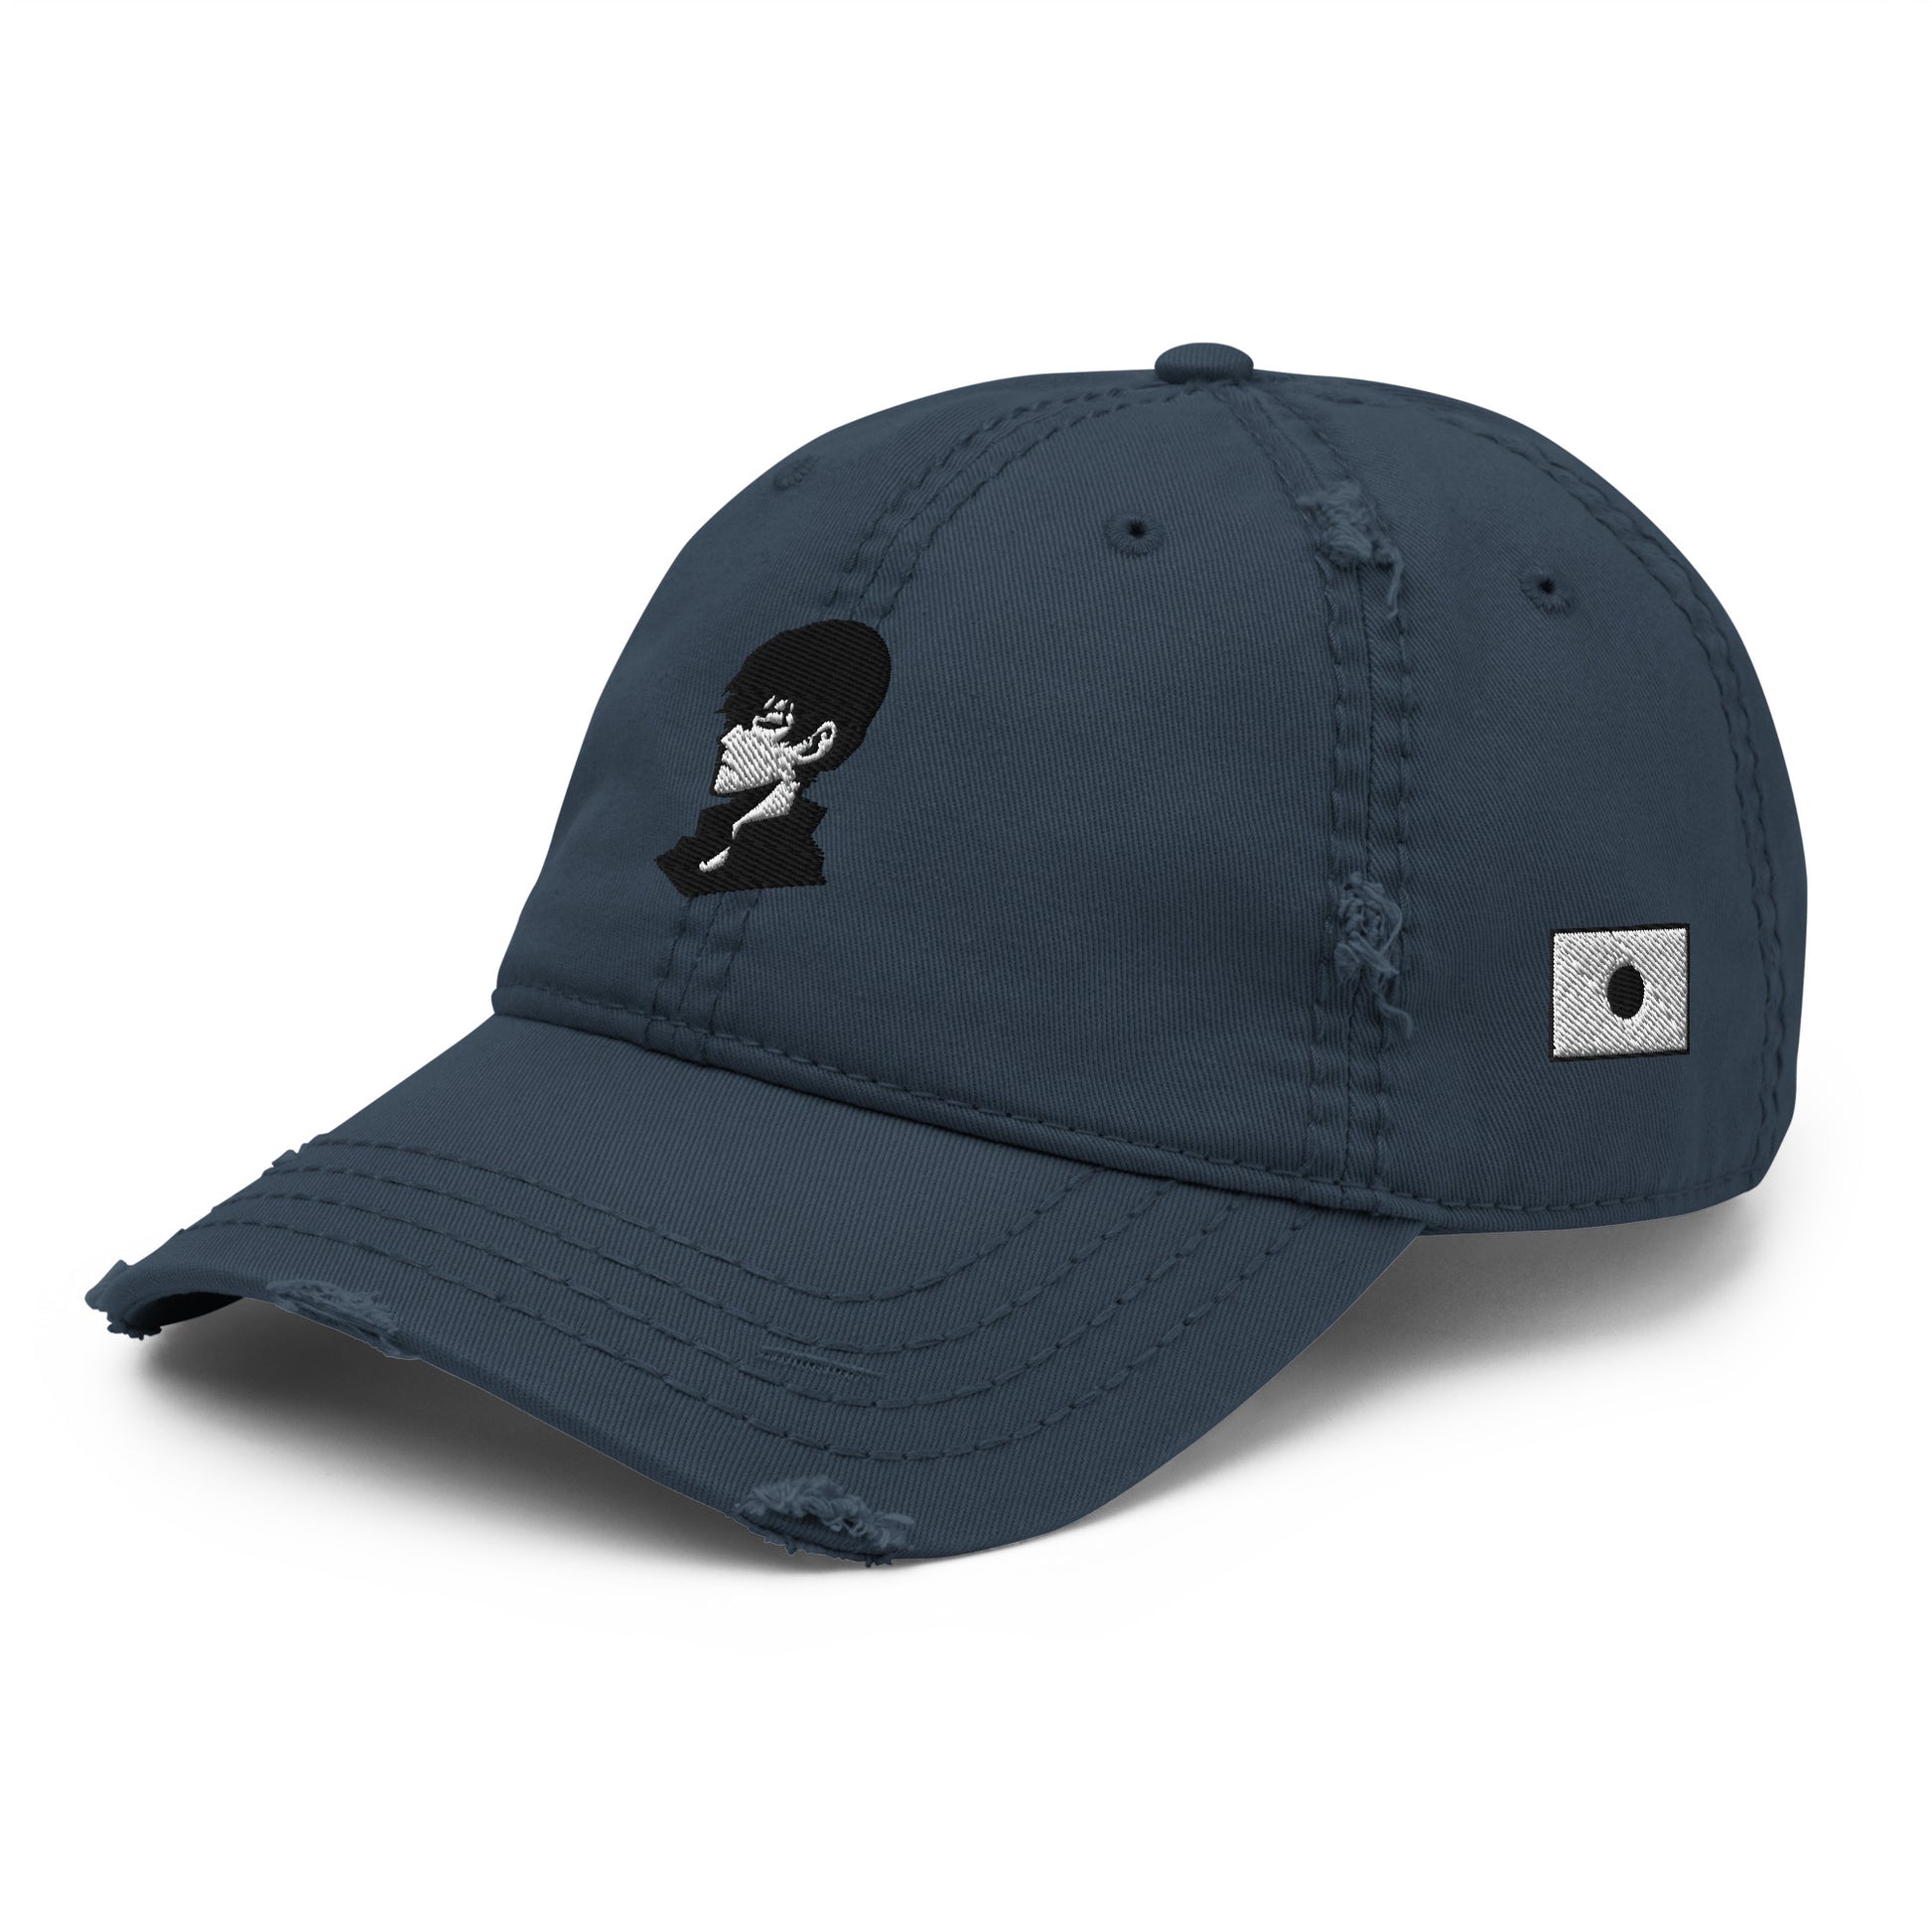 cap-from-the-front-with-anime-symbol